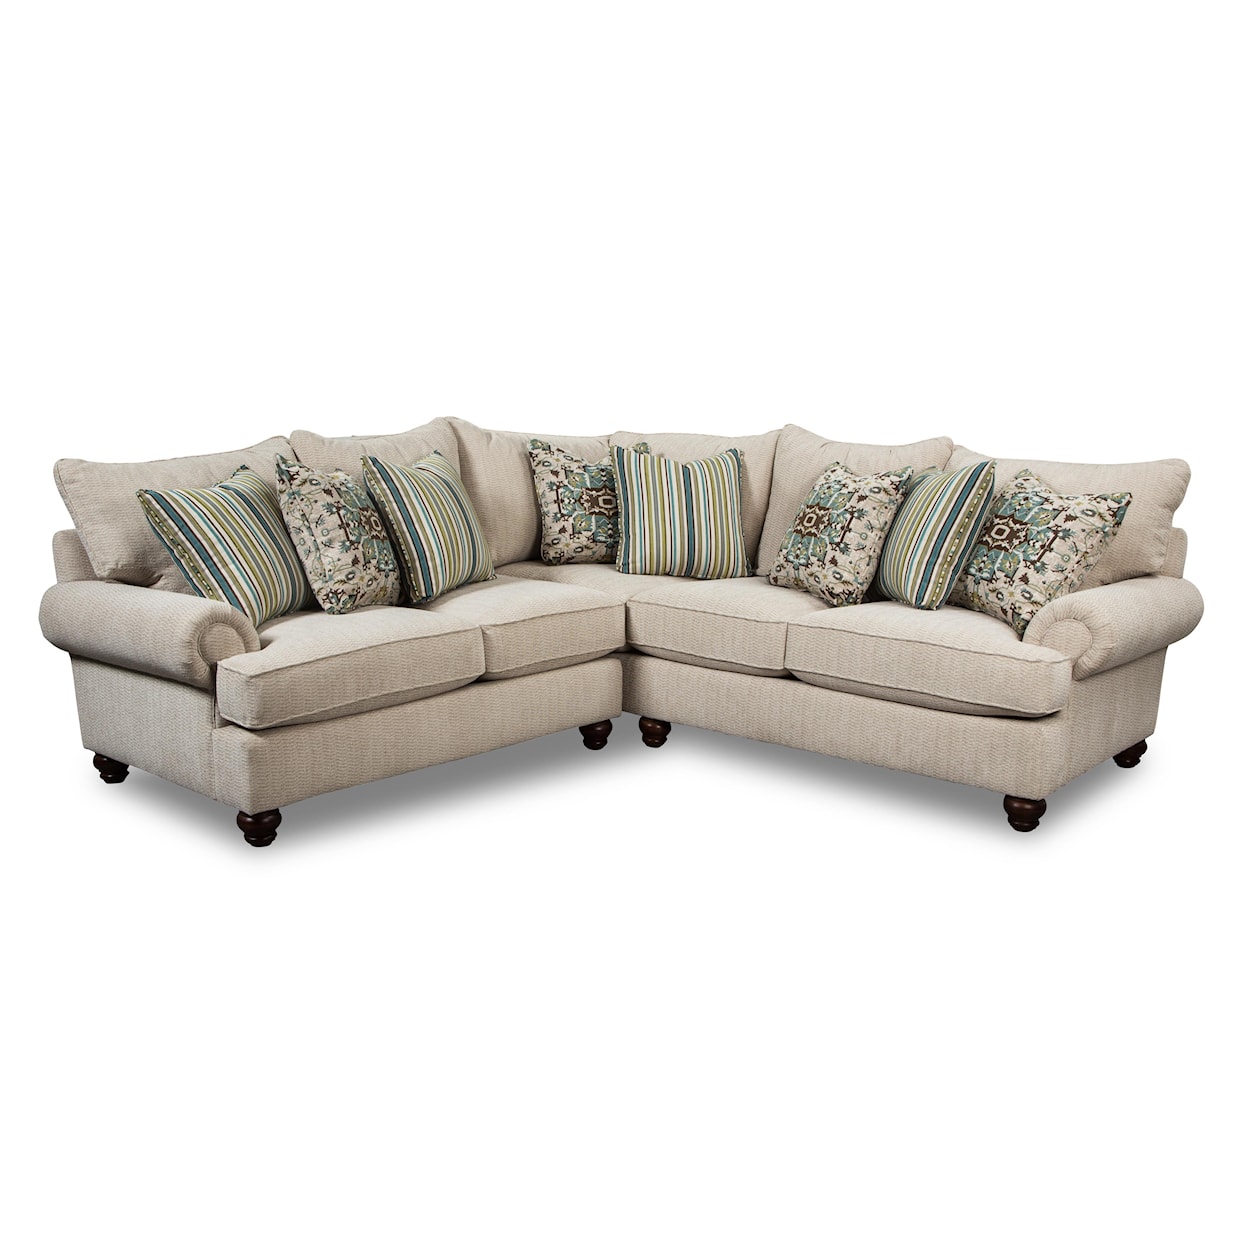 Craftmaster 797050Pc 2 Pc Sectional Sofa